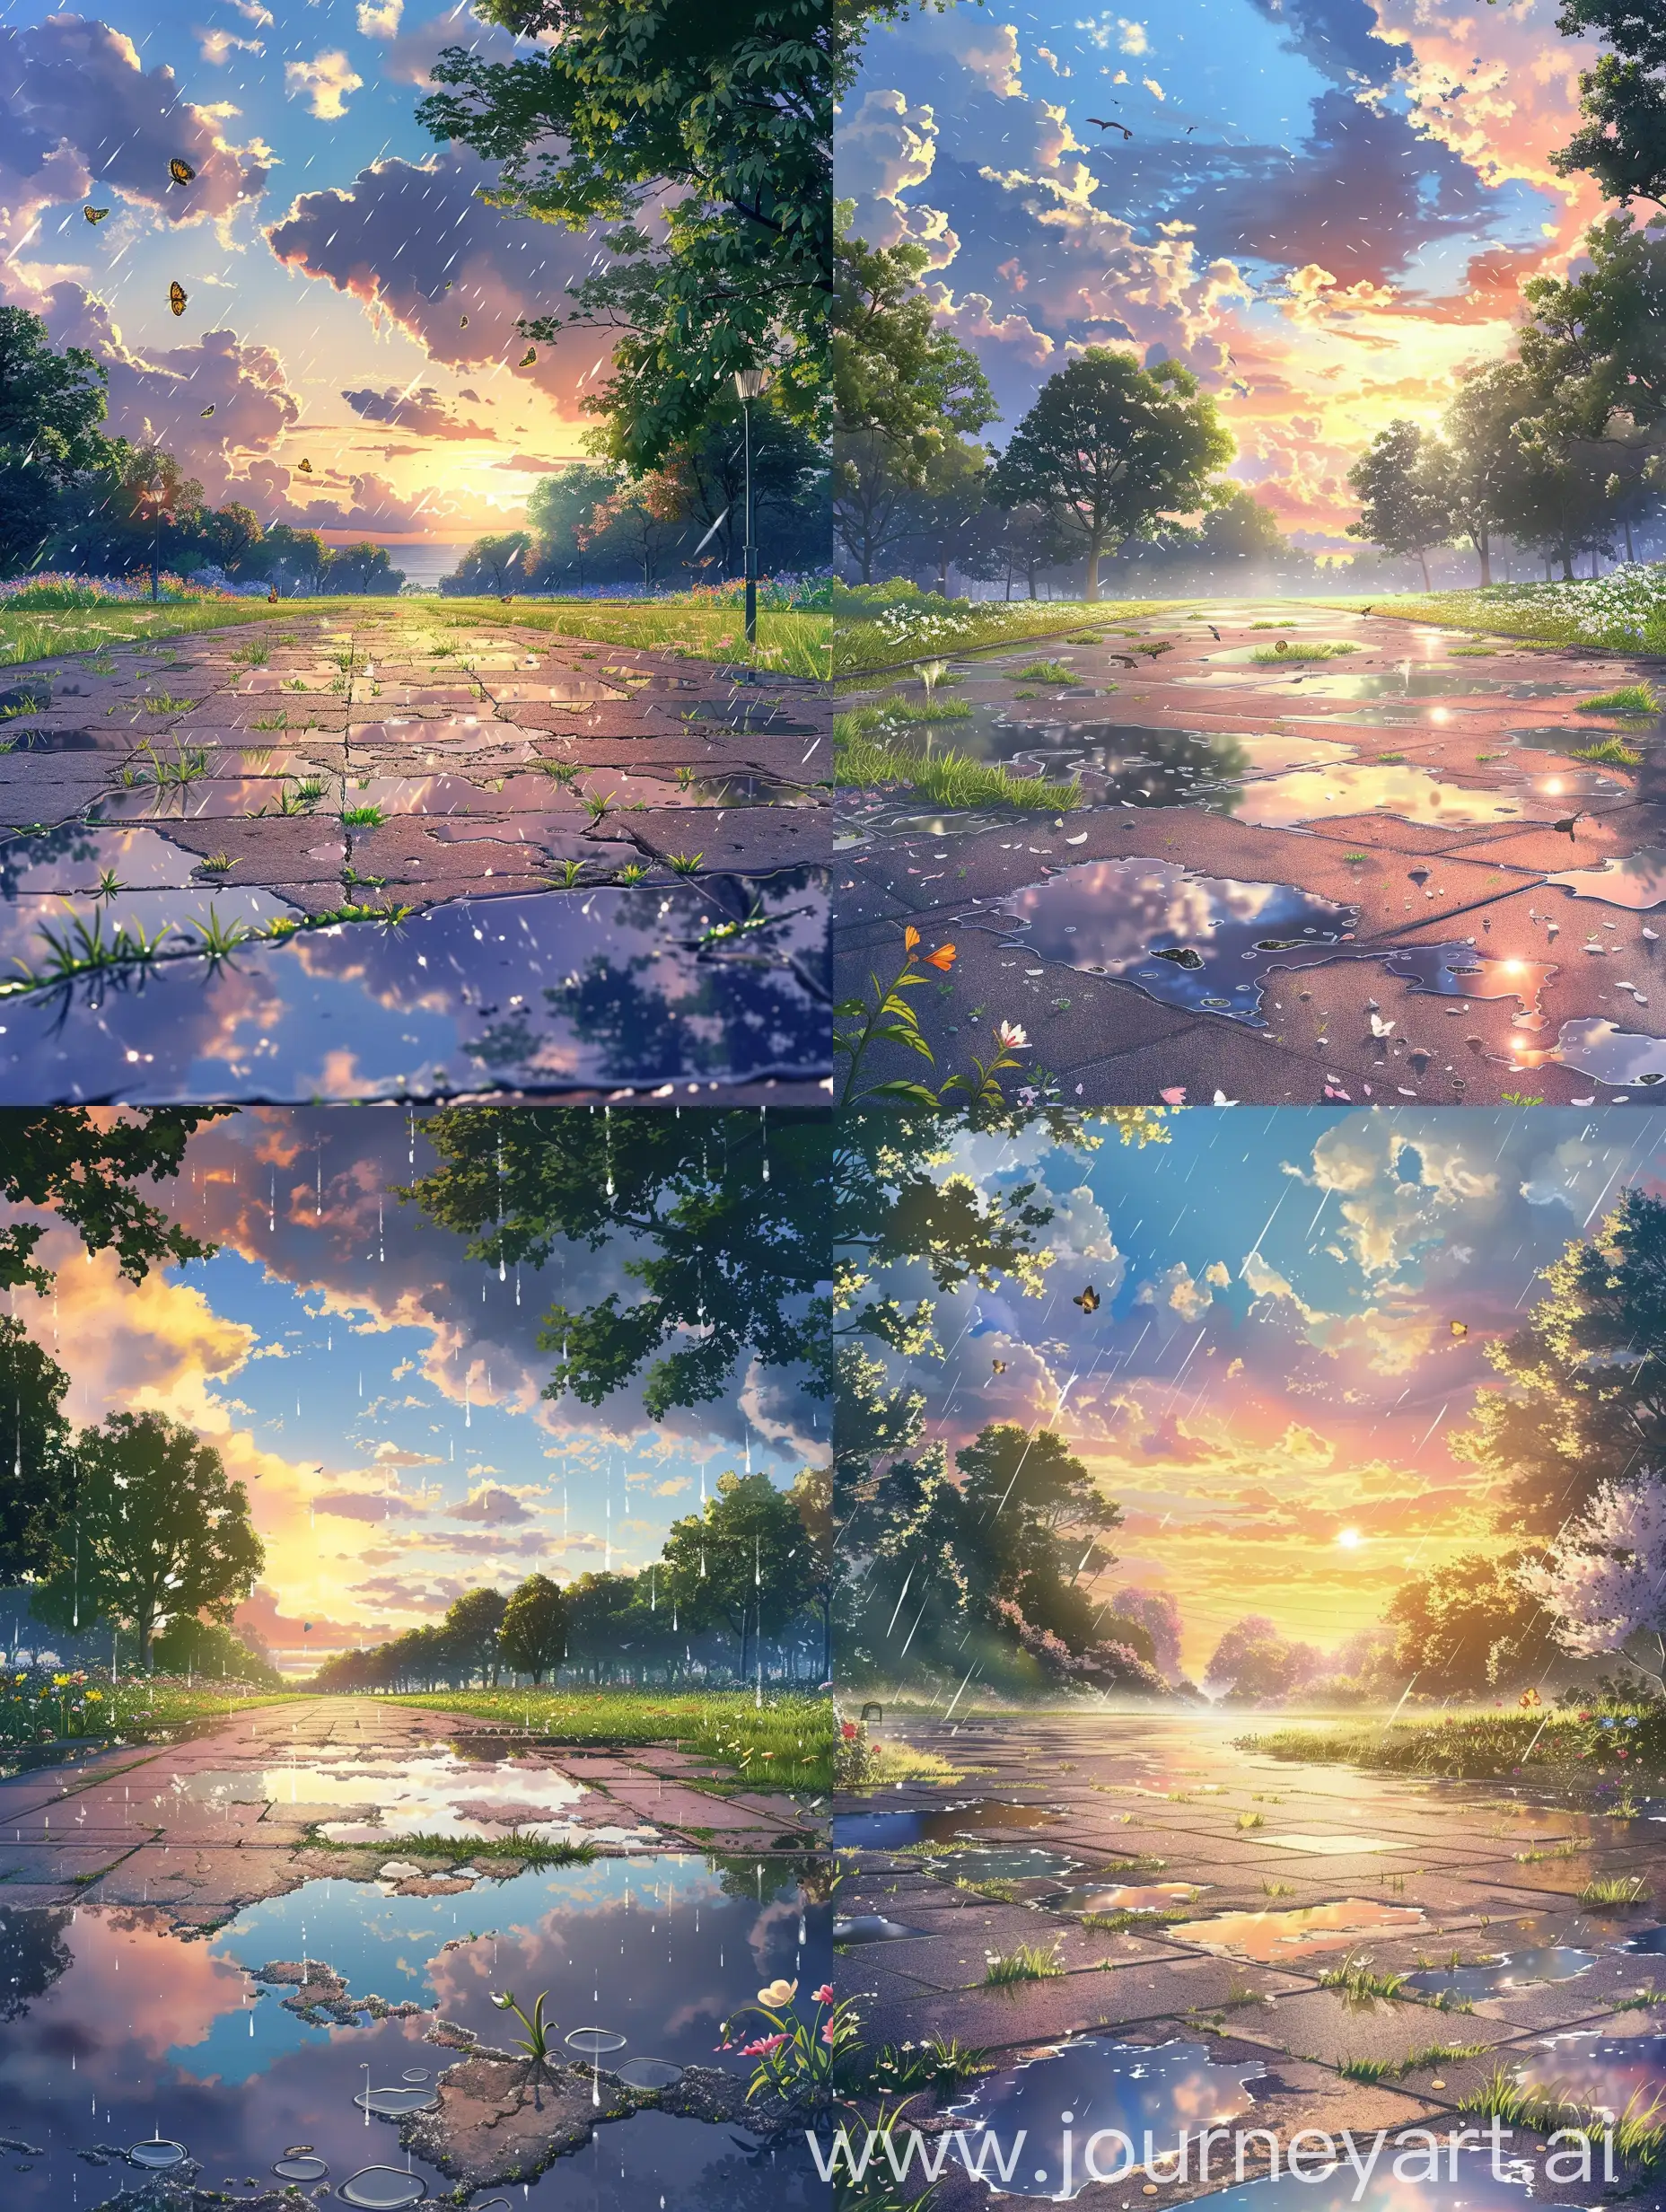 Beautiful anime style,Makoto Shinkai style,approaching perfection, the tranquil beauty of a park unfolds just after a refreshing summer rain. The ground is adorned with remnants of water, creating a shimmering mosaic that reflects the beauty of the surrounding landscape. Puddles form in patches, mirroring the vibrant colors of the sky above, while delicate blades of grass peek through the moist earth, adding a touch of green to the scene.Above, the sky emerges from the passing storm, transforming from a canvas of dark clouds to a breathtaking display of vivid hues. Soft pastels blend seamlessly with the golden rays of the emerging sun, casting a warm glow over the park below. Wisps of mist rise gently from the ground, adding an ethereal touch to the tranquil atmosphere.

The park is alive with the sounds of nature awakening after the rain, from the gentle rustle of leaves to the melodious chirping of birds. Trees sway gently in the breeze, their branches adorned with droplets that sparkle like diamonds in the sunlight. Flowers bloom in vibrant hues, their petals unfurling to greet the day, while butterflies flit gracefully from blossom to blossom.Amidst this serene setting, a sense of peace and tranquility pervades the air, inviting you to pause and soak in the beauty of the moment. It's a scene that captures the essence of summer's embrace, where the simple joys of nature come to life in all their splendor.As you gaze upon this enchanting scene, you can't help but feel a sense of wonder and gratitude for the beauty that surrounds us, even in the aftermath of a passing storm.

